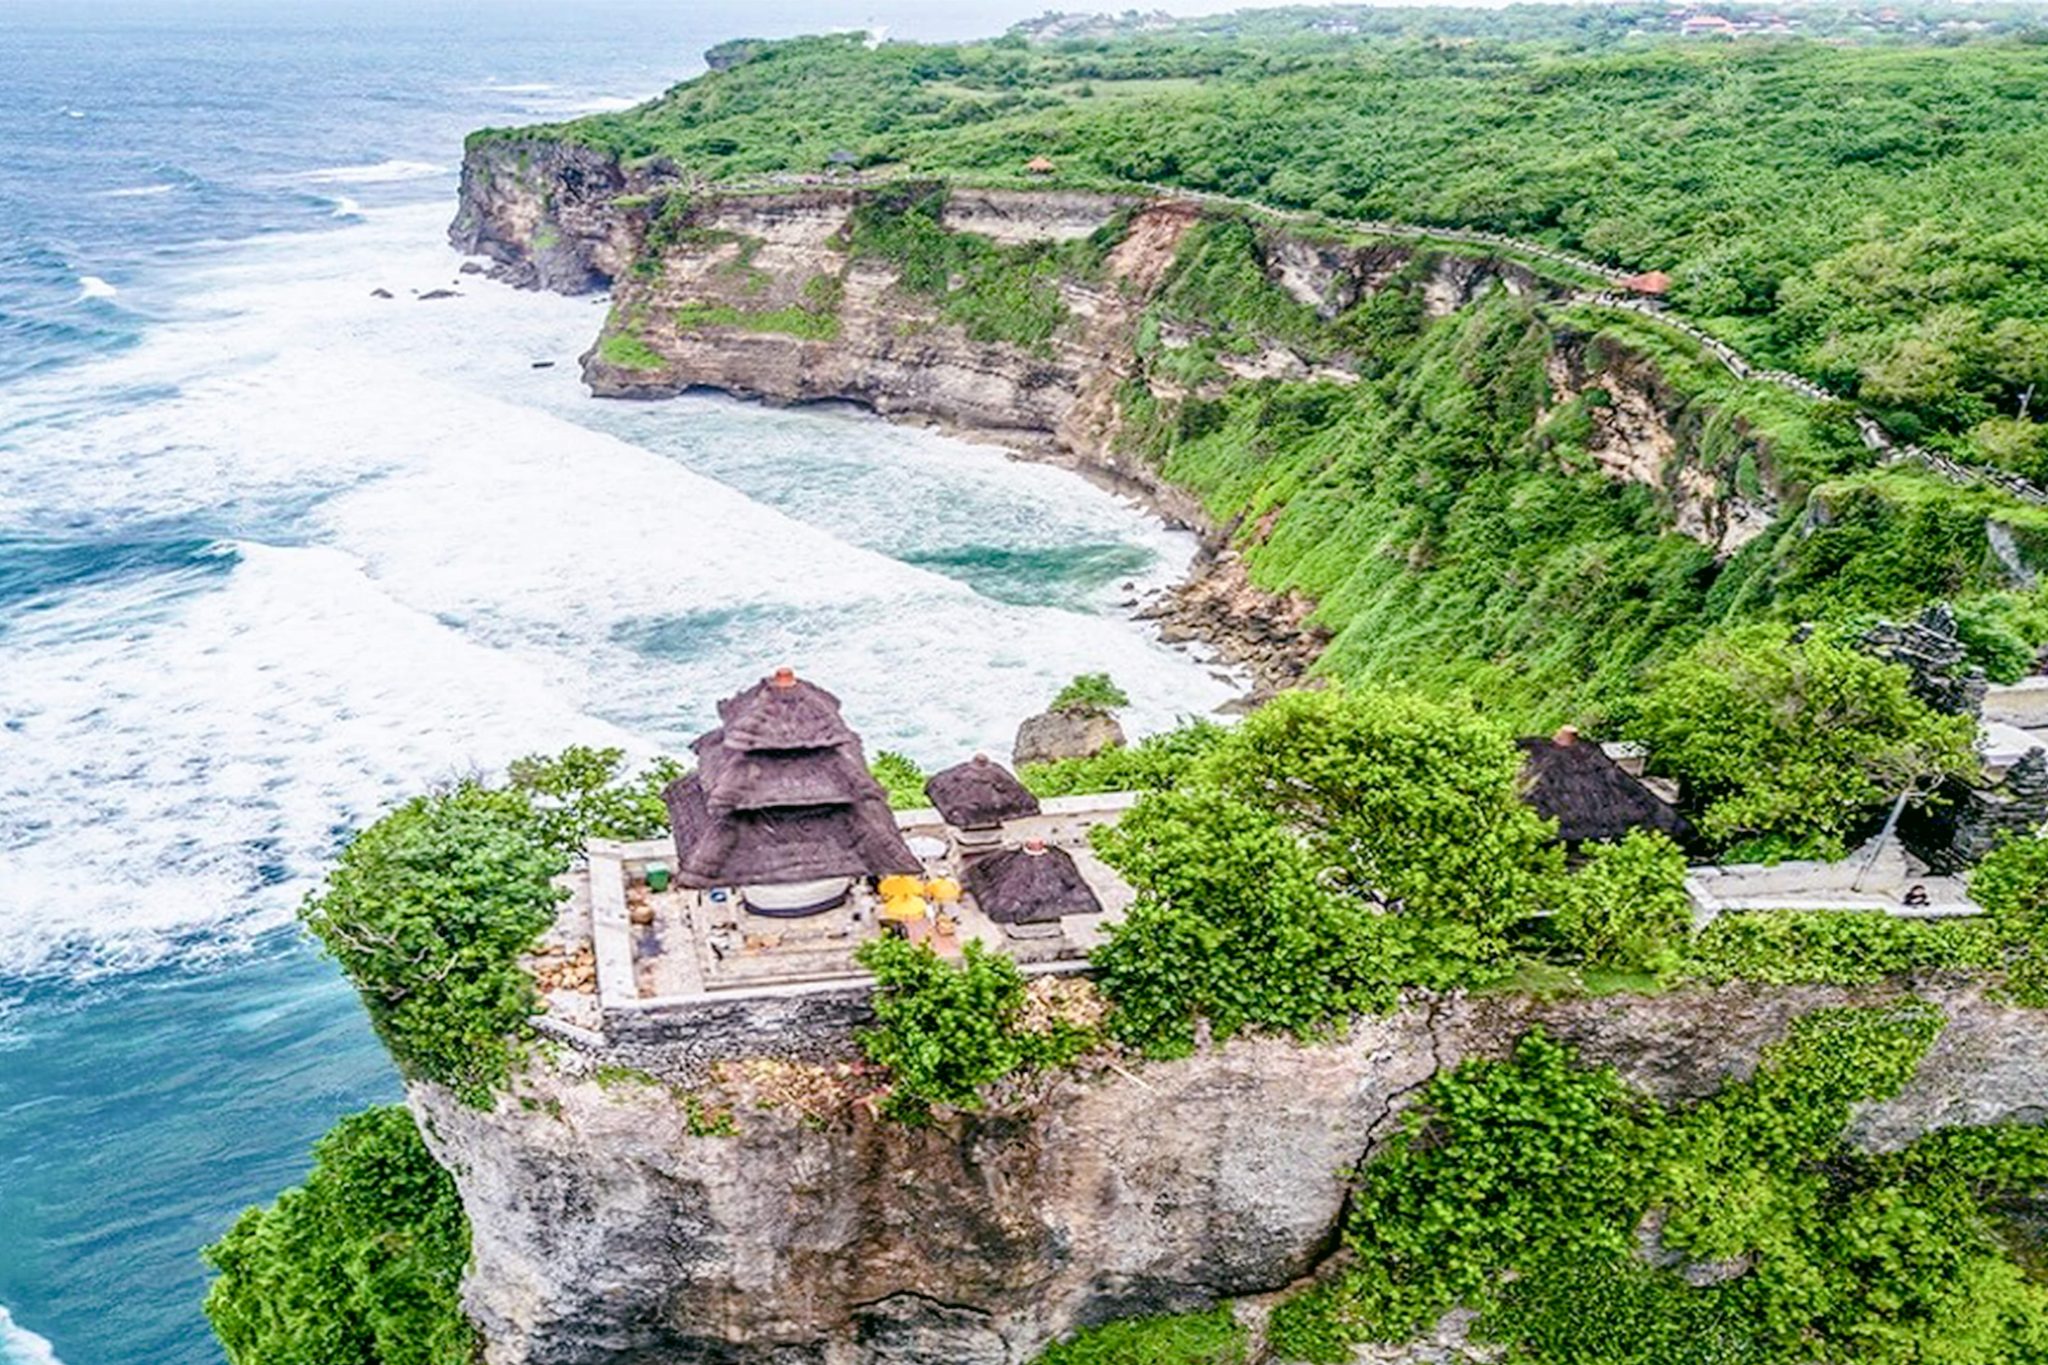 bali tours from sydney